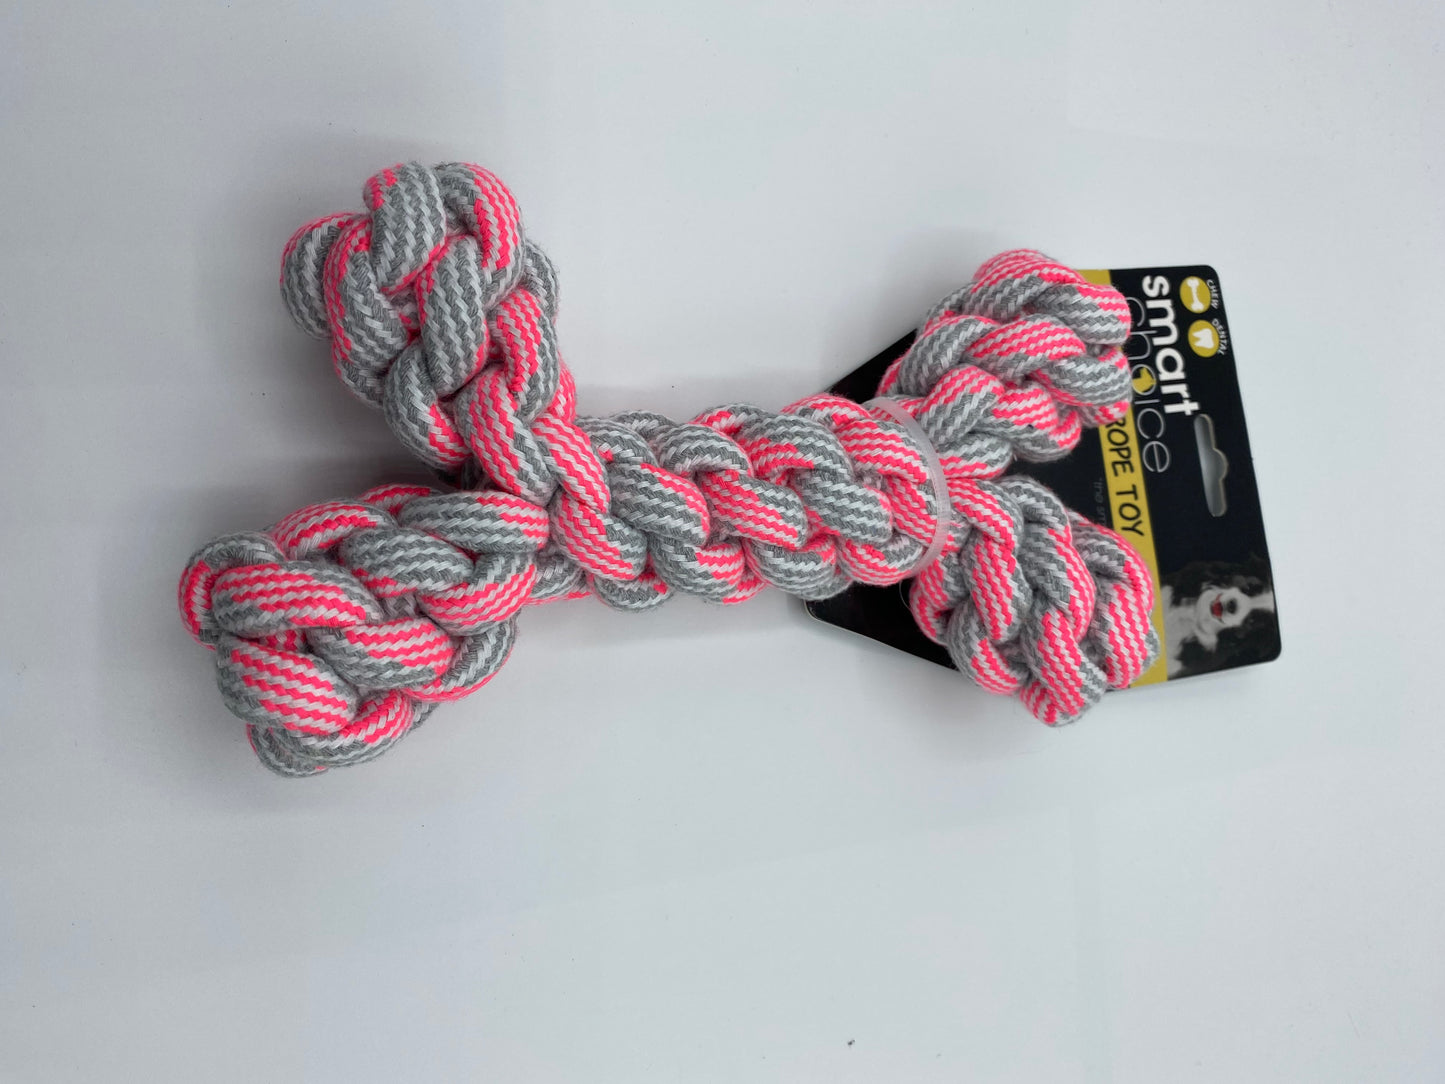 Bone Shape Rope Dog Toy in Three Coloures Pink,Yellow and Green Approx Size 19cm Long